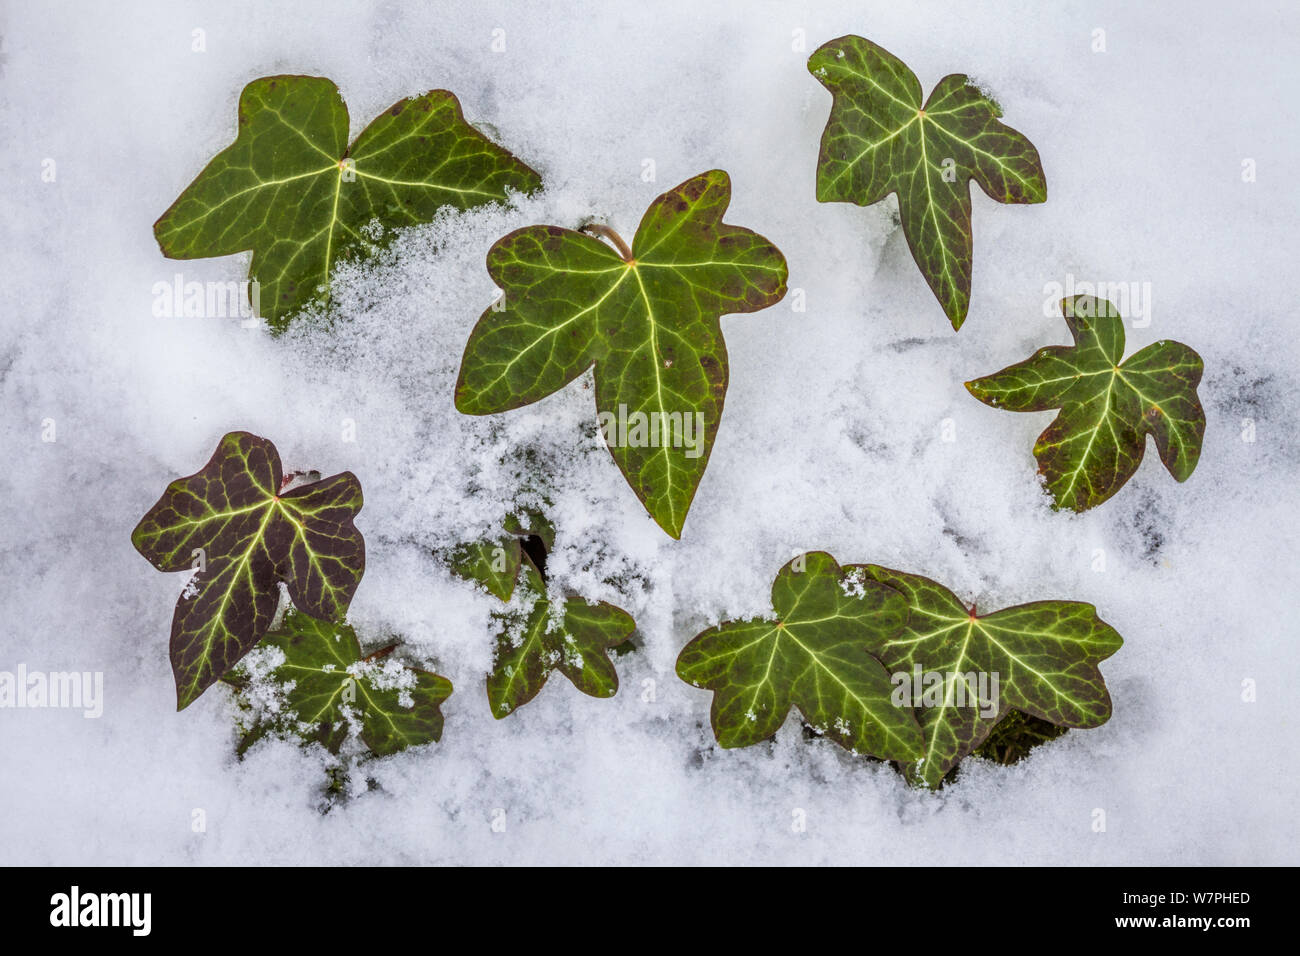 Ivy (Hedera helix) clump protruding through snow. Peak District National Park, Derbyshire, UK, January. Stock Photo